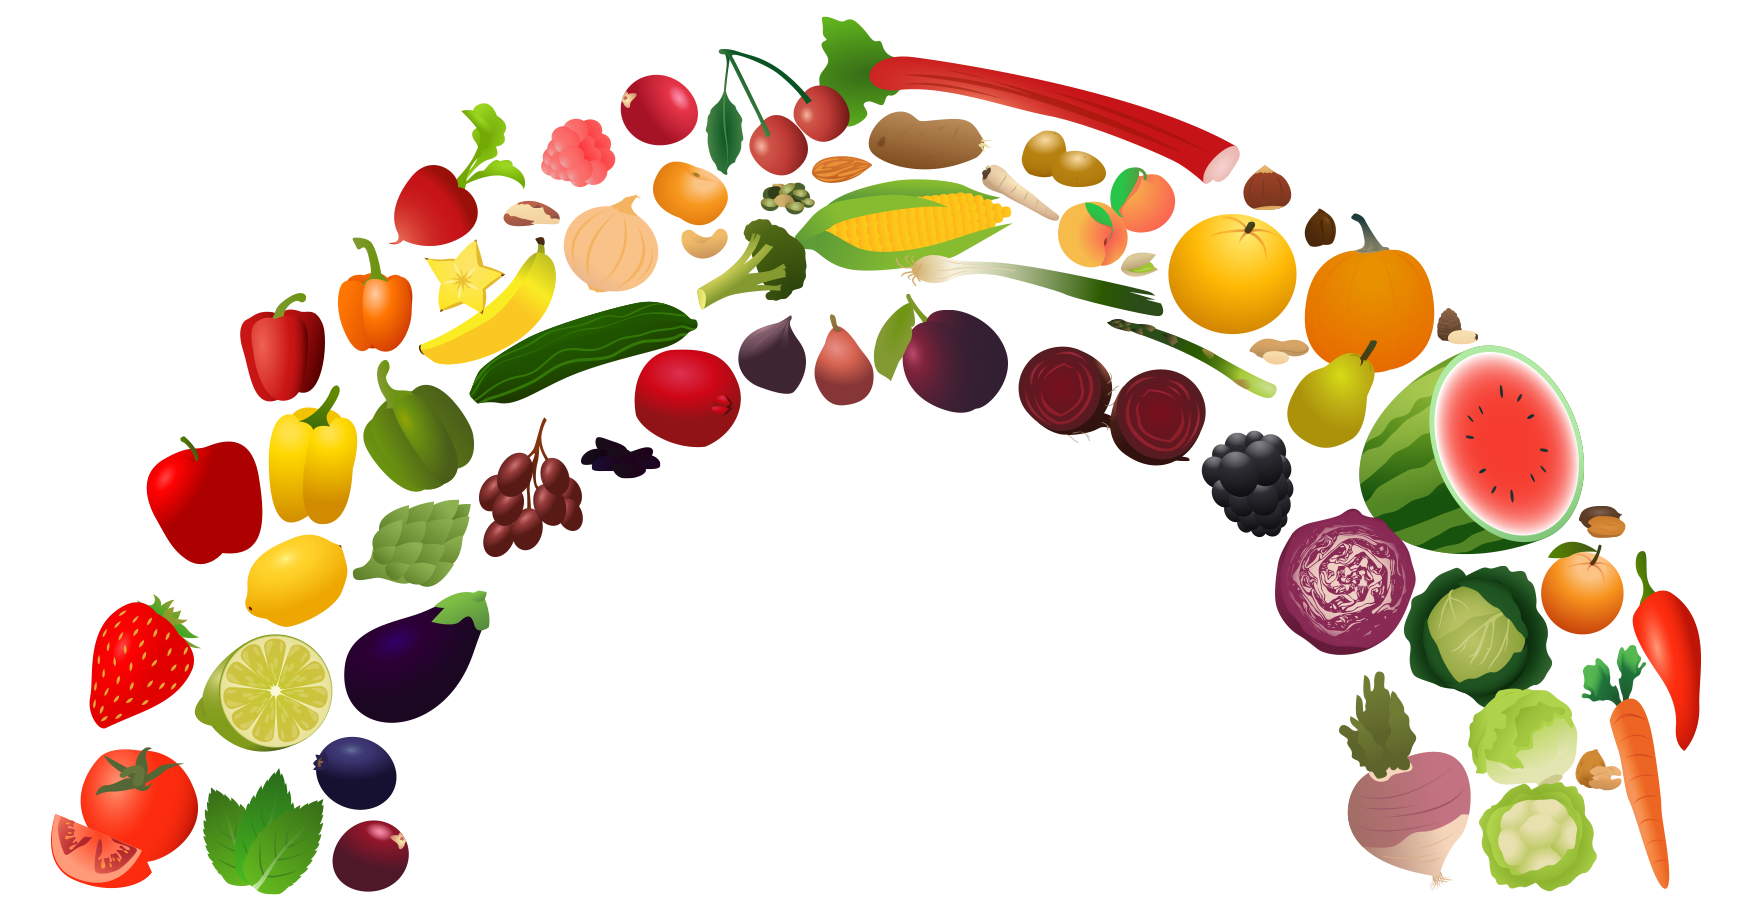 View rainbow png free. Nutrition clipart healthy lifestyle